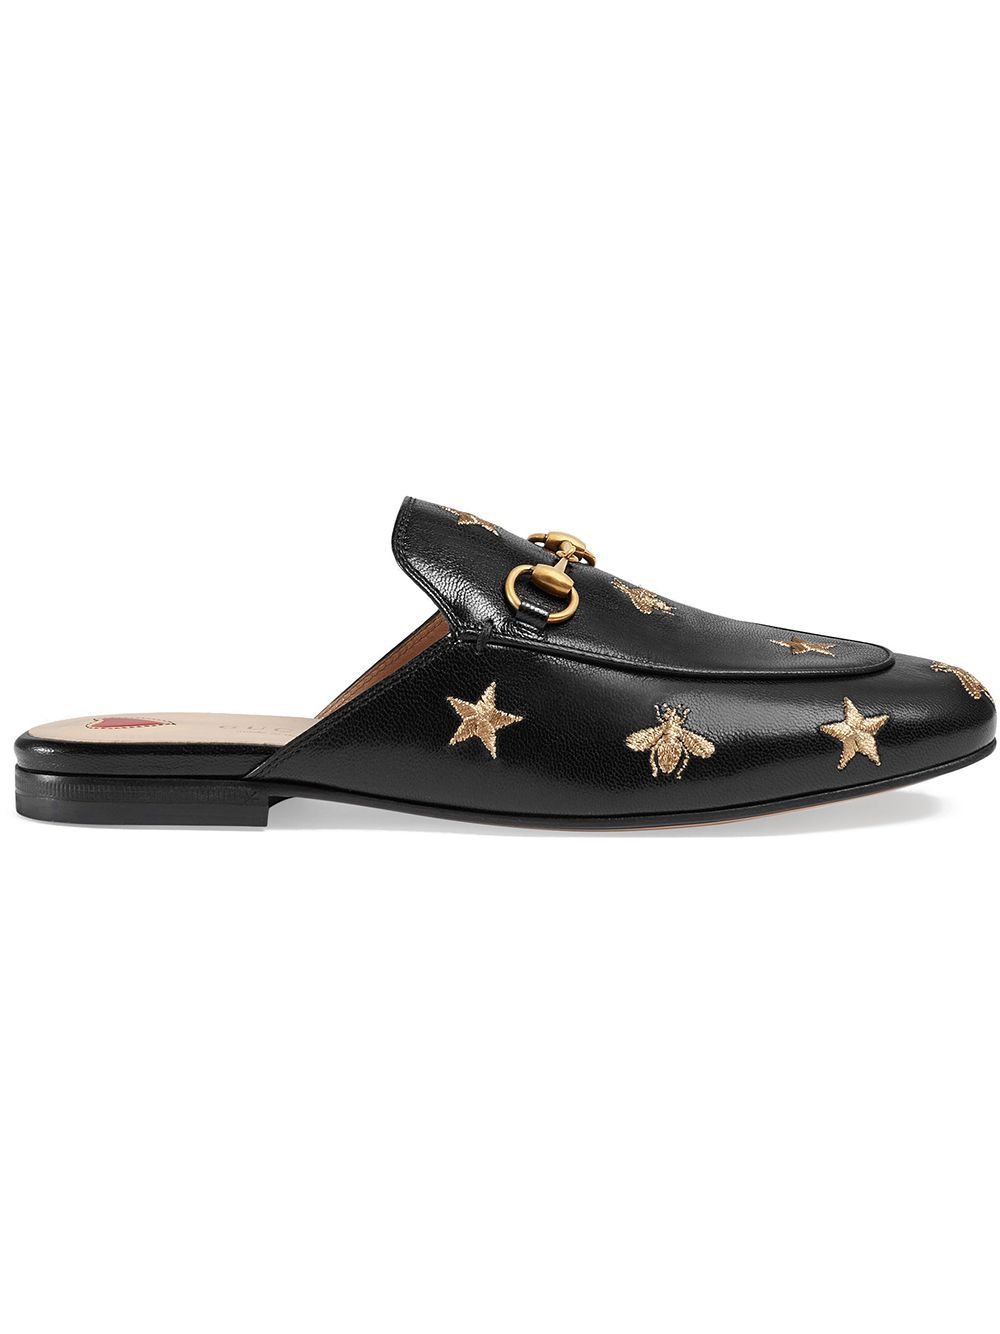 Gucci Princetown embroidered leather slipper - Black | FarFetch US